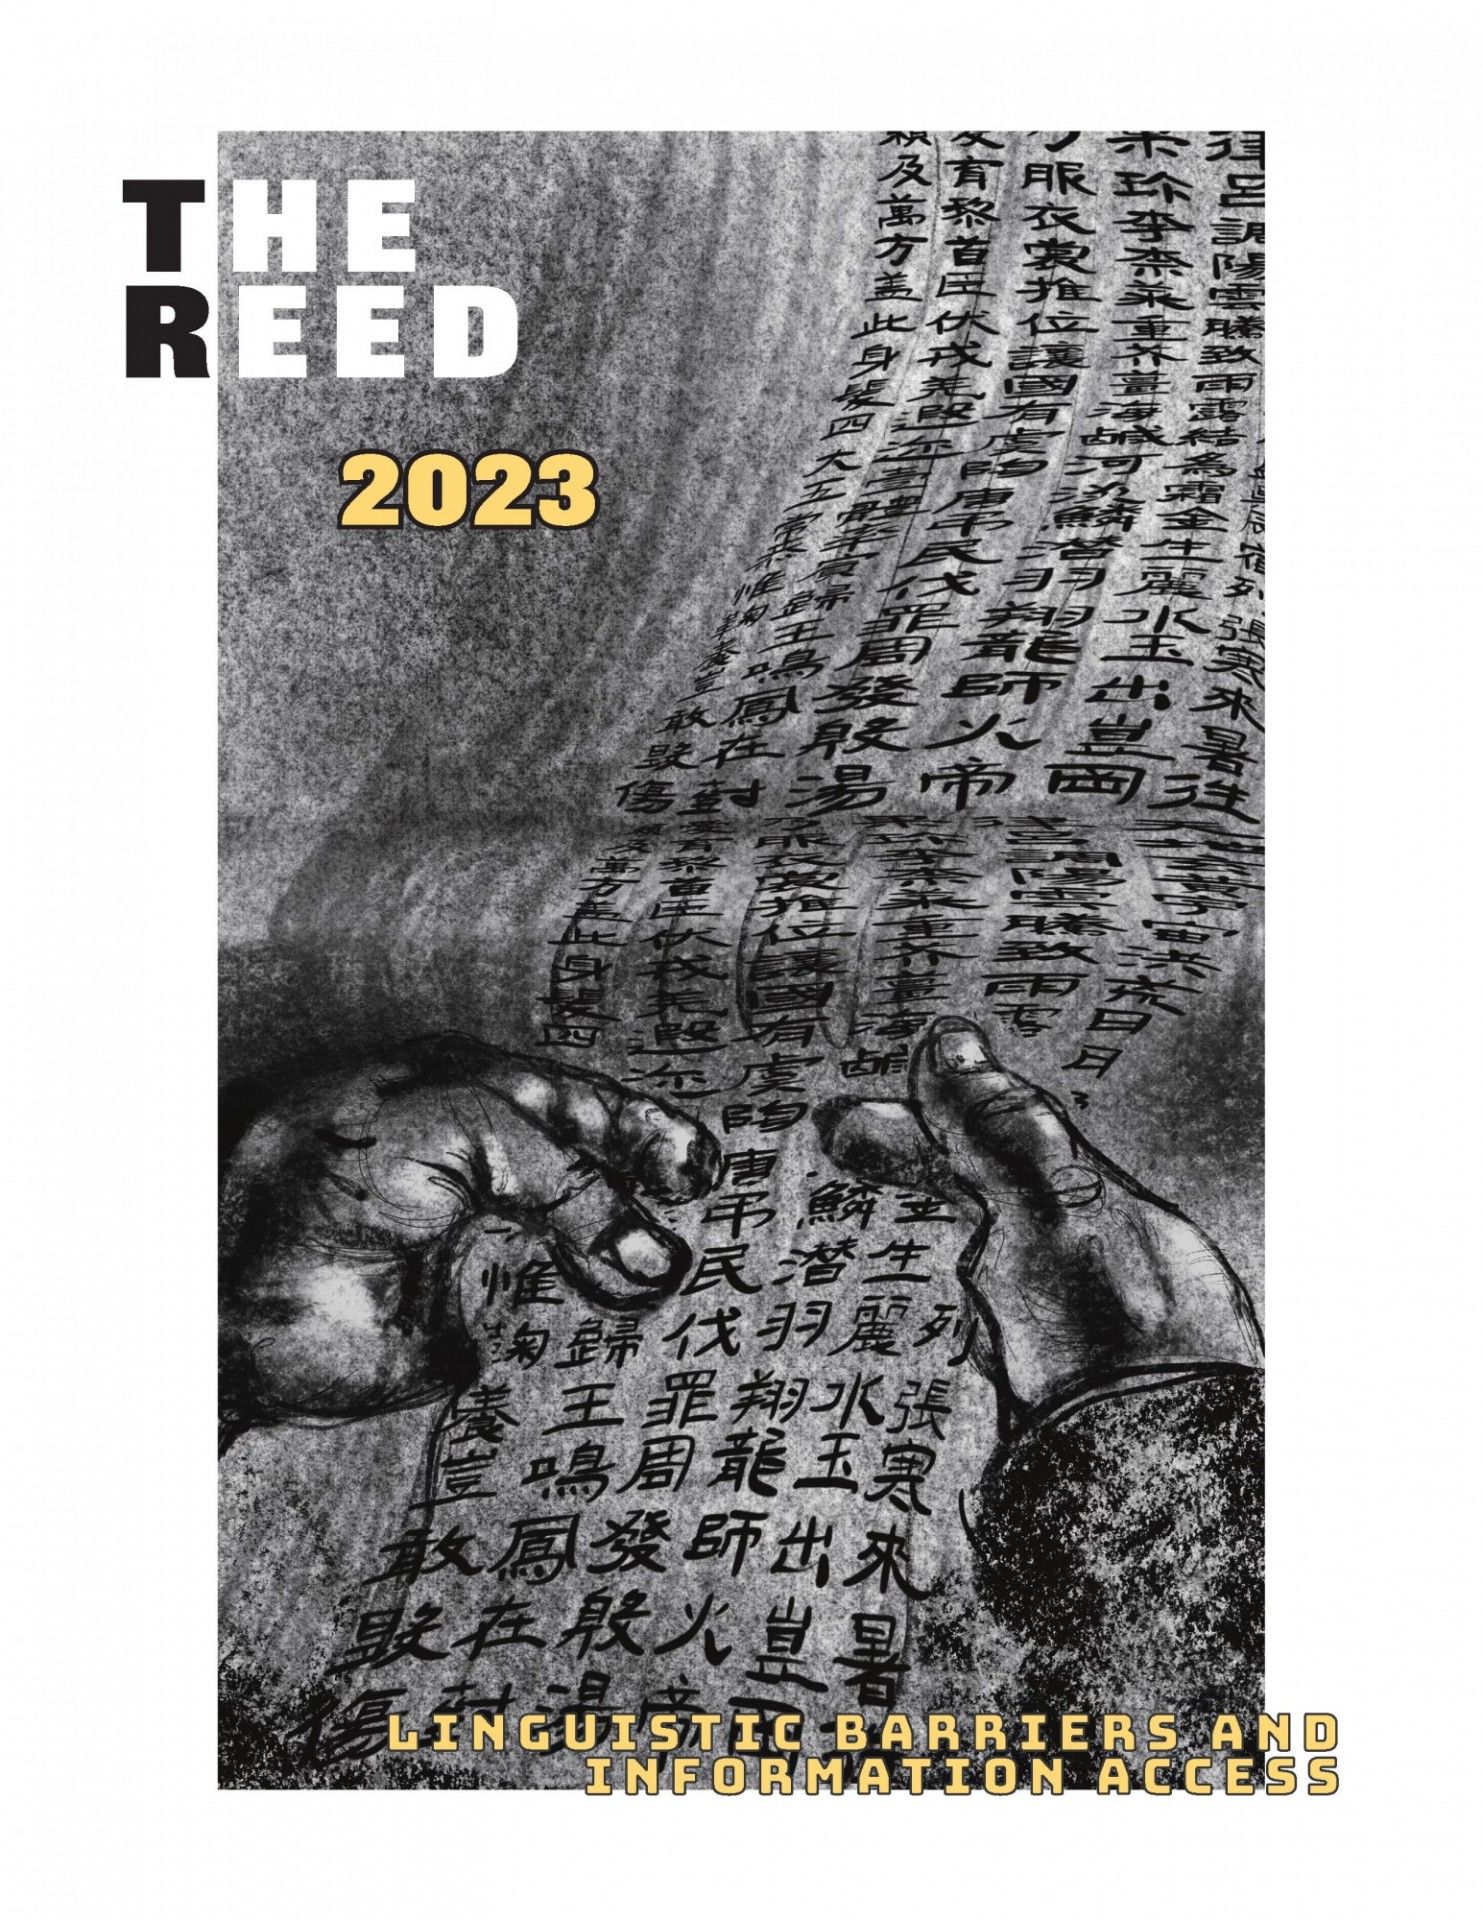 The Reed 2023